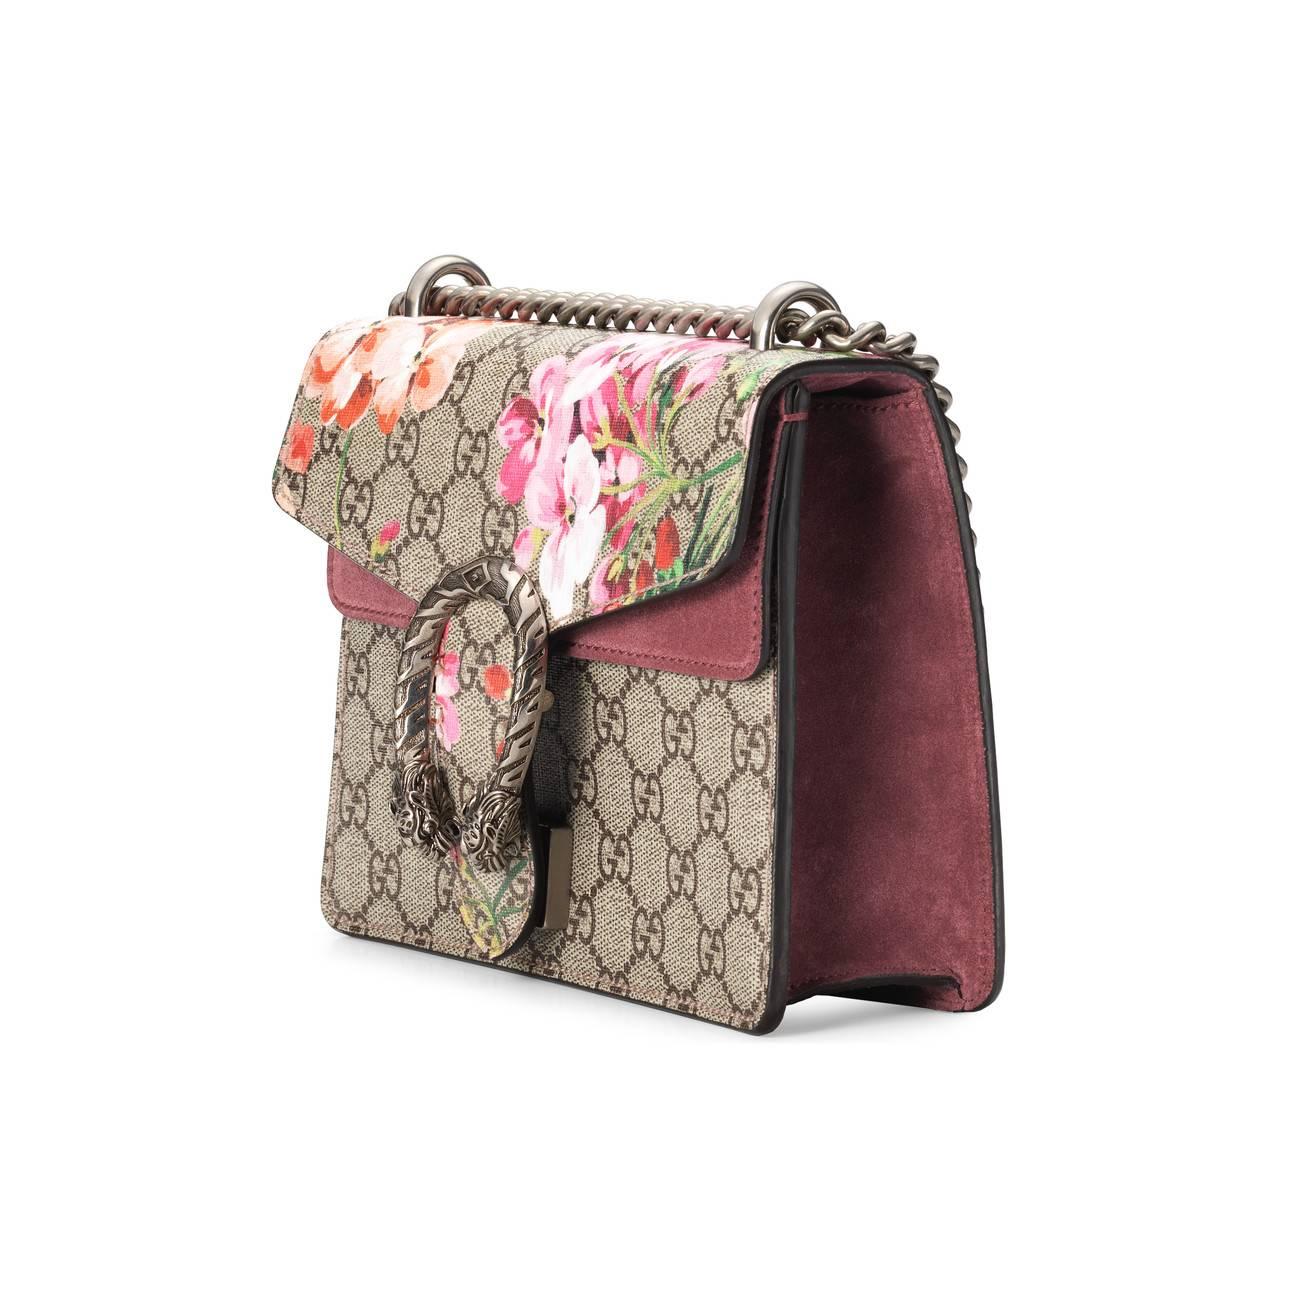 2016 Re-edition Dionysus GG Blooms Bag in Natural | Lyst